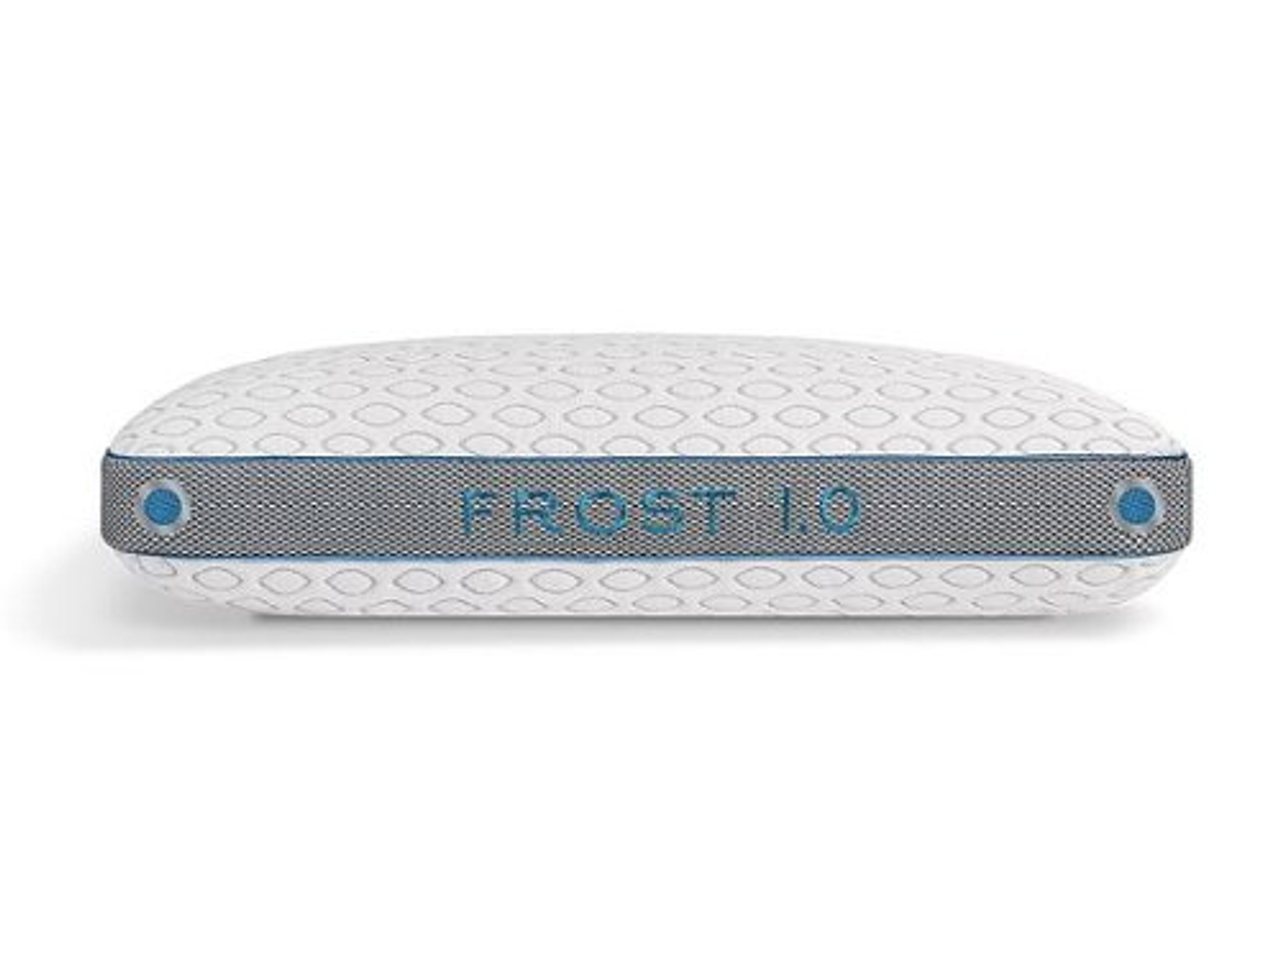 Bedgear - Frost Performance Pillow 1.0 - White